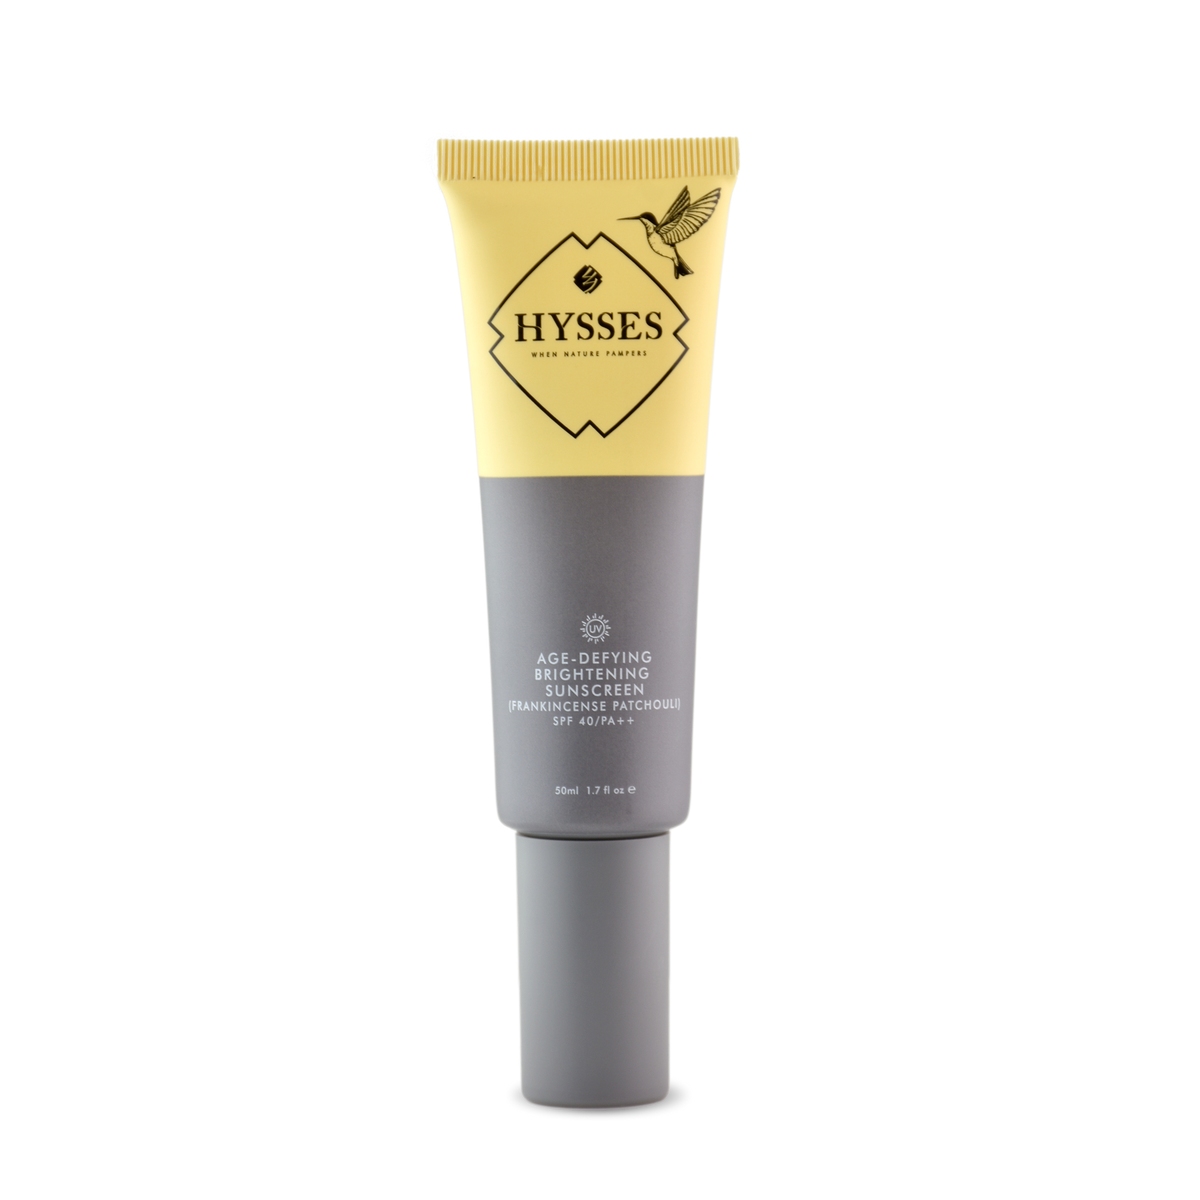 Age Defying Brightening Sunscreen Frankincense Patchouli SPF 40 / PA++